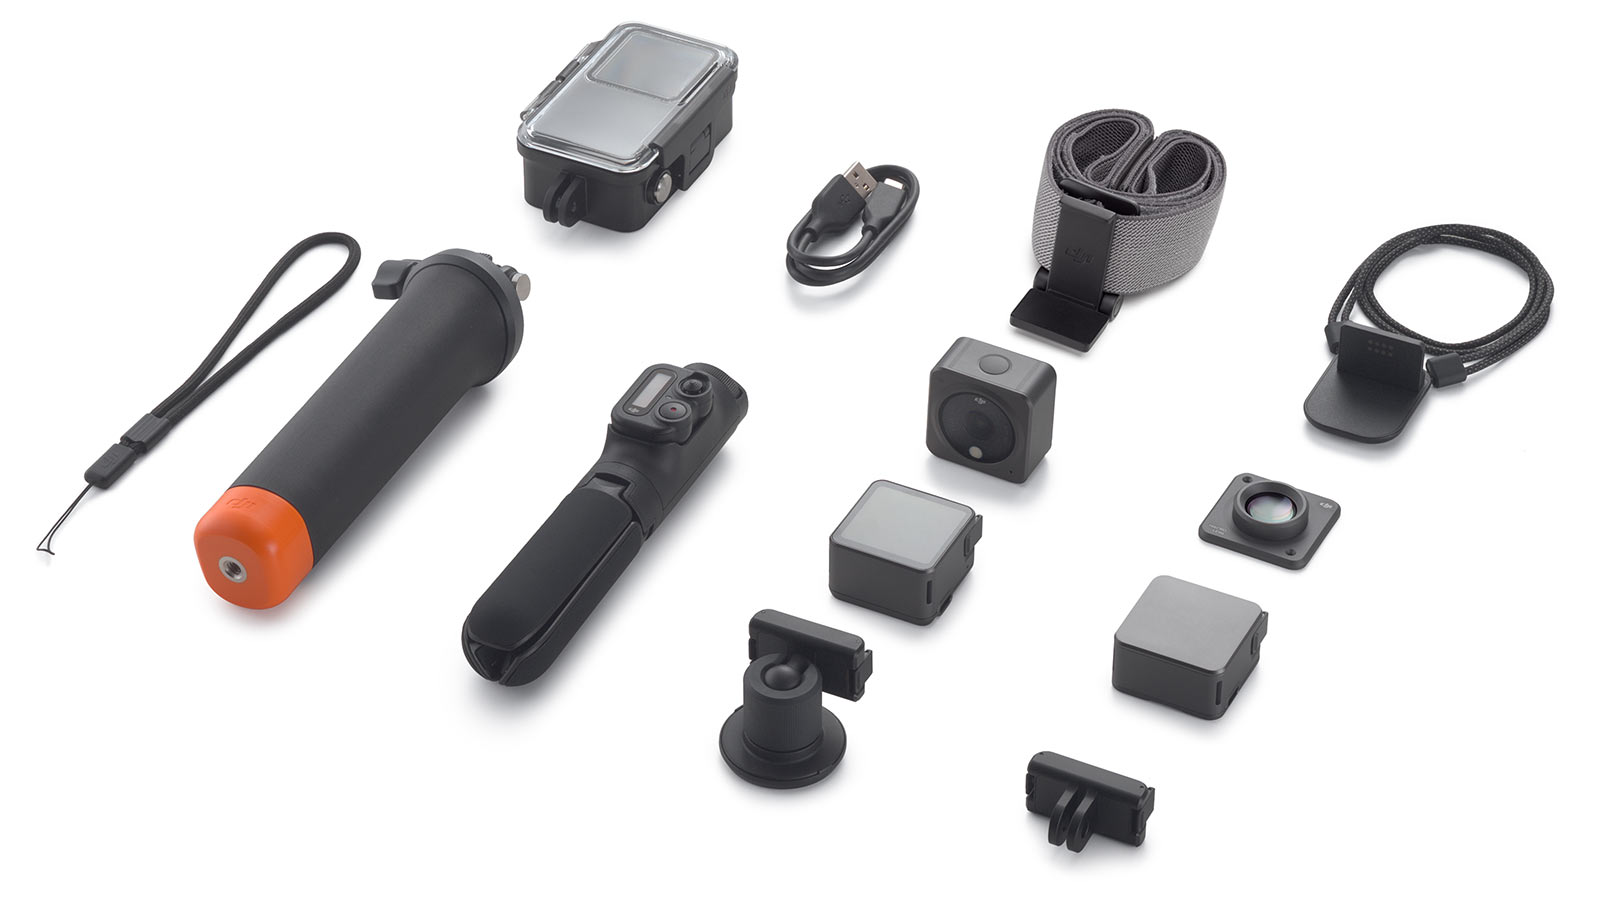 optional accessories and bundles for the DJI Action 2 video camera